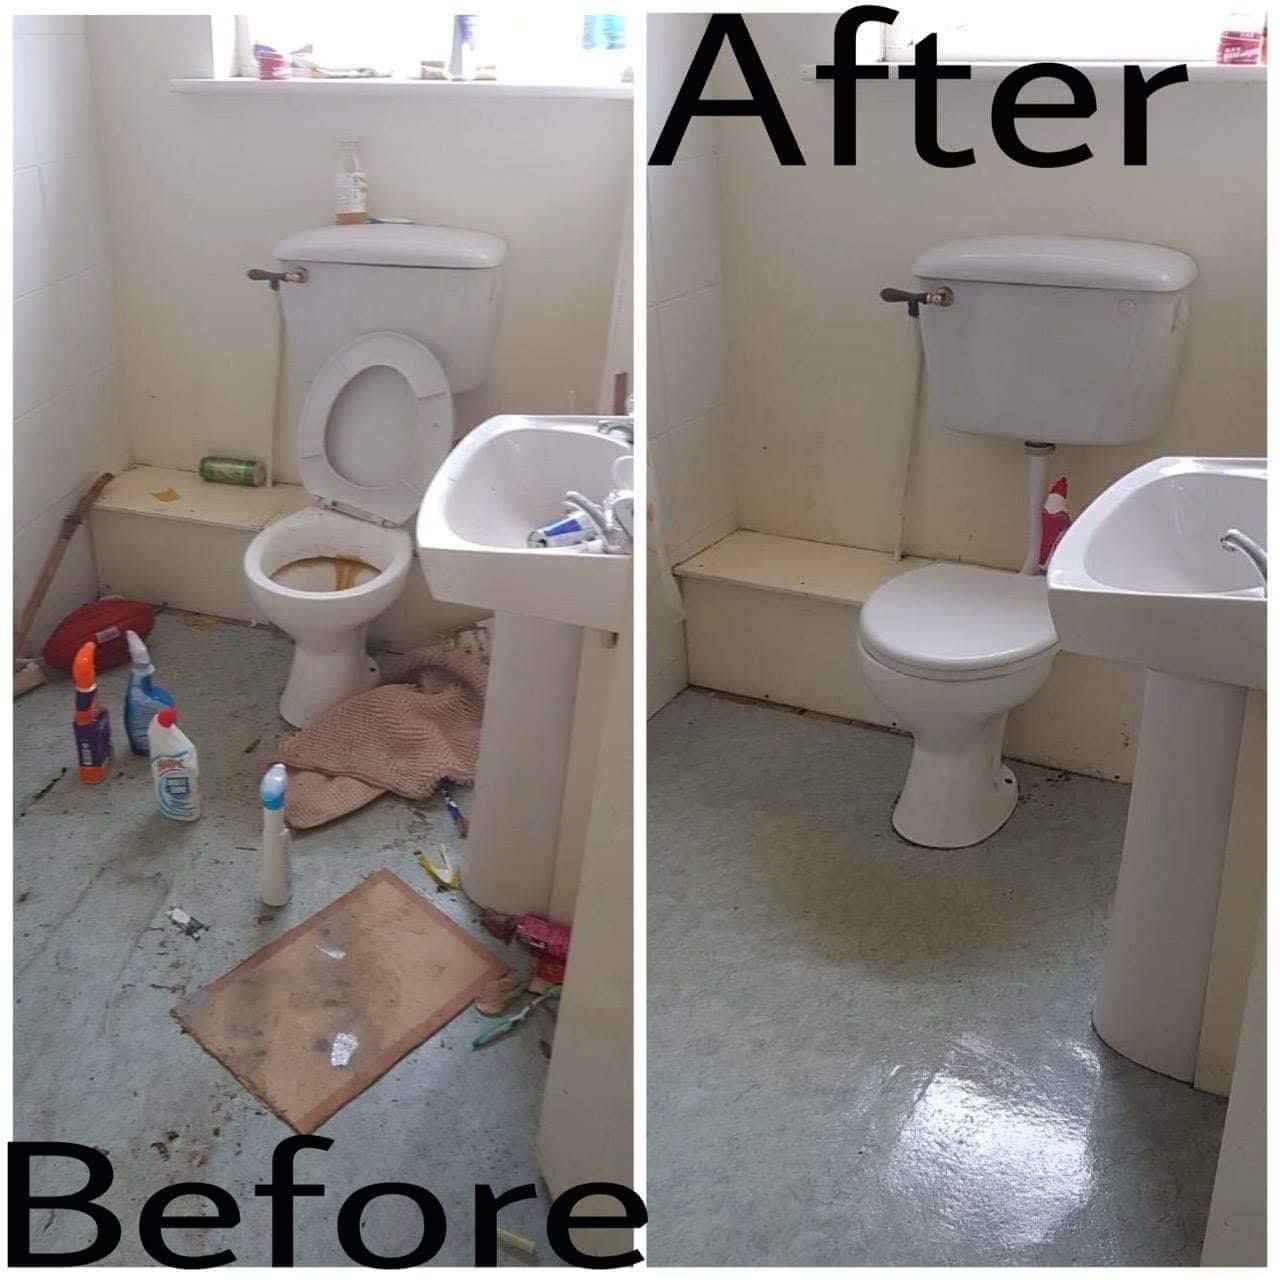 An image showing a bathroom we cleaned before and after